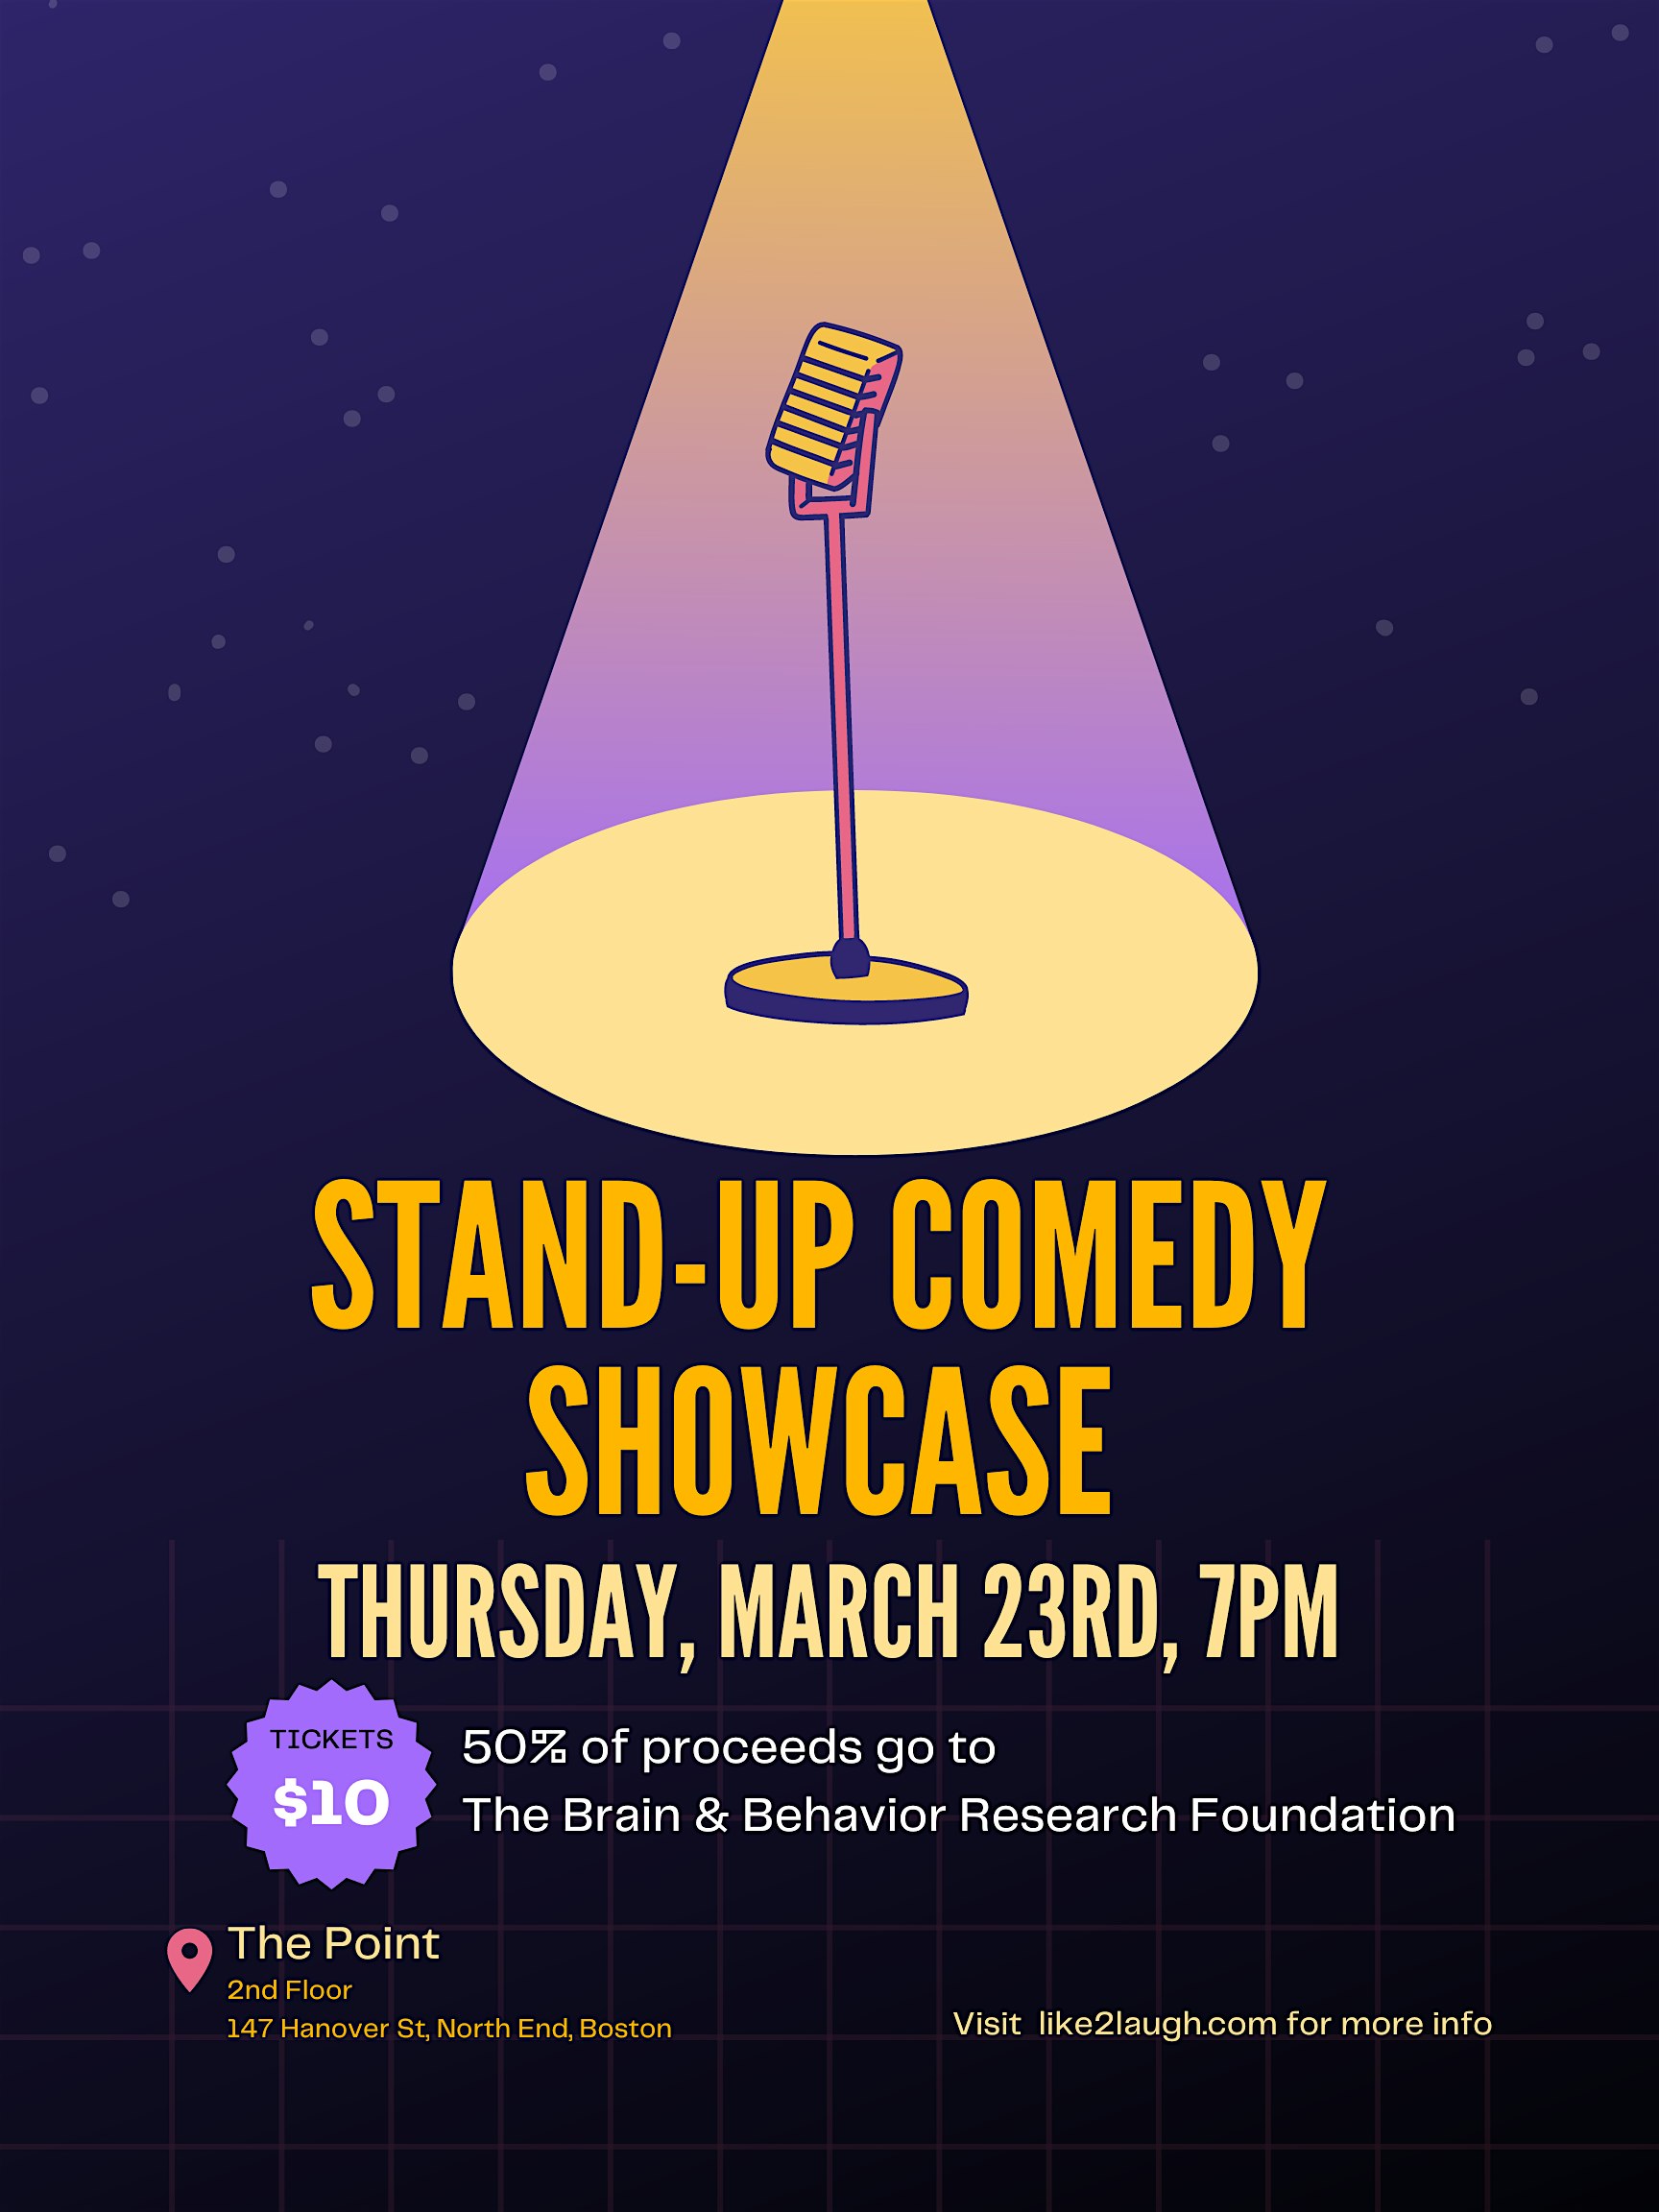 Comedy Showcase – Get to The Point in Historic Boston